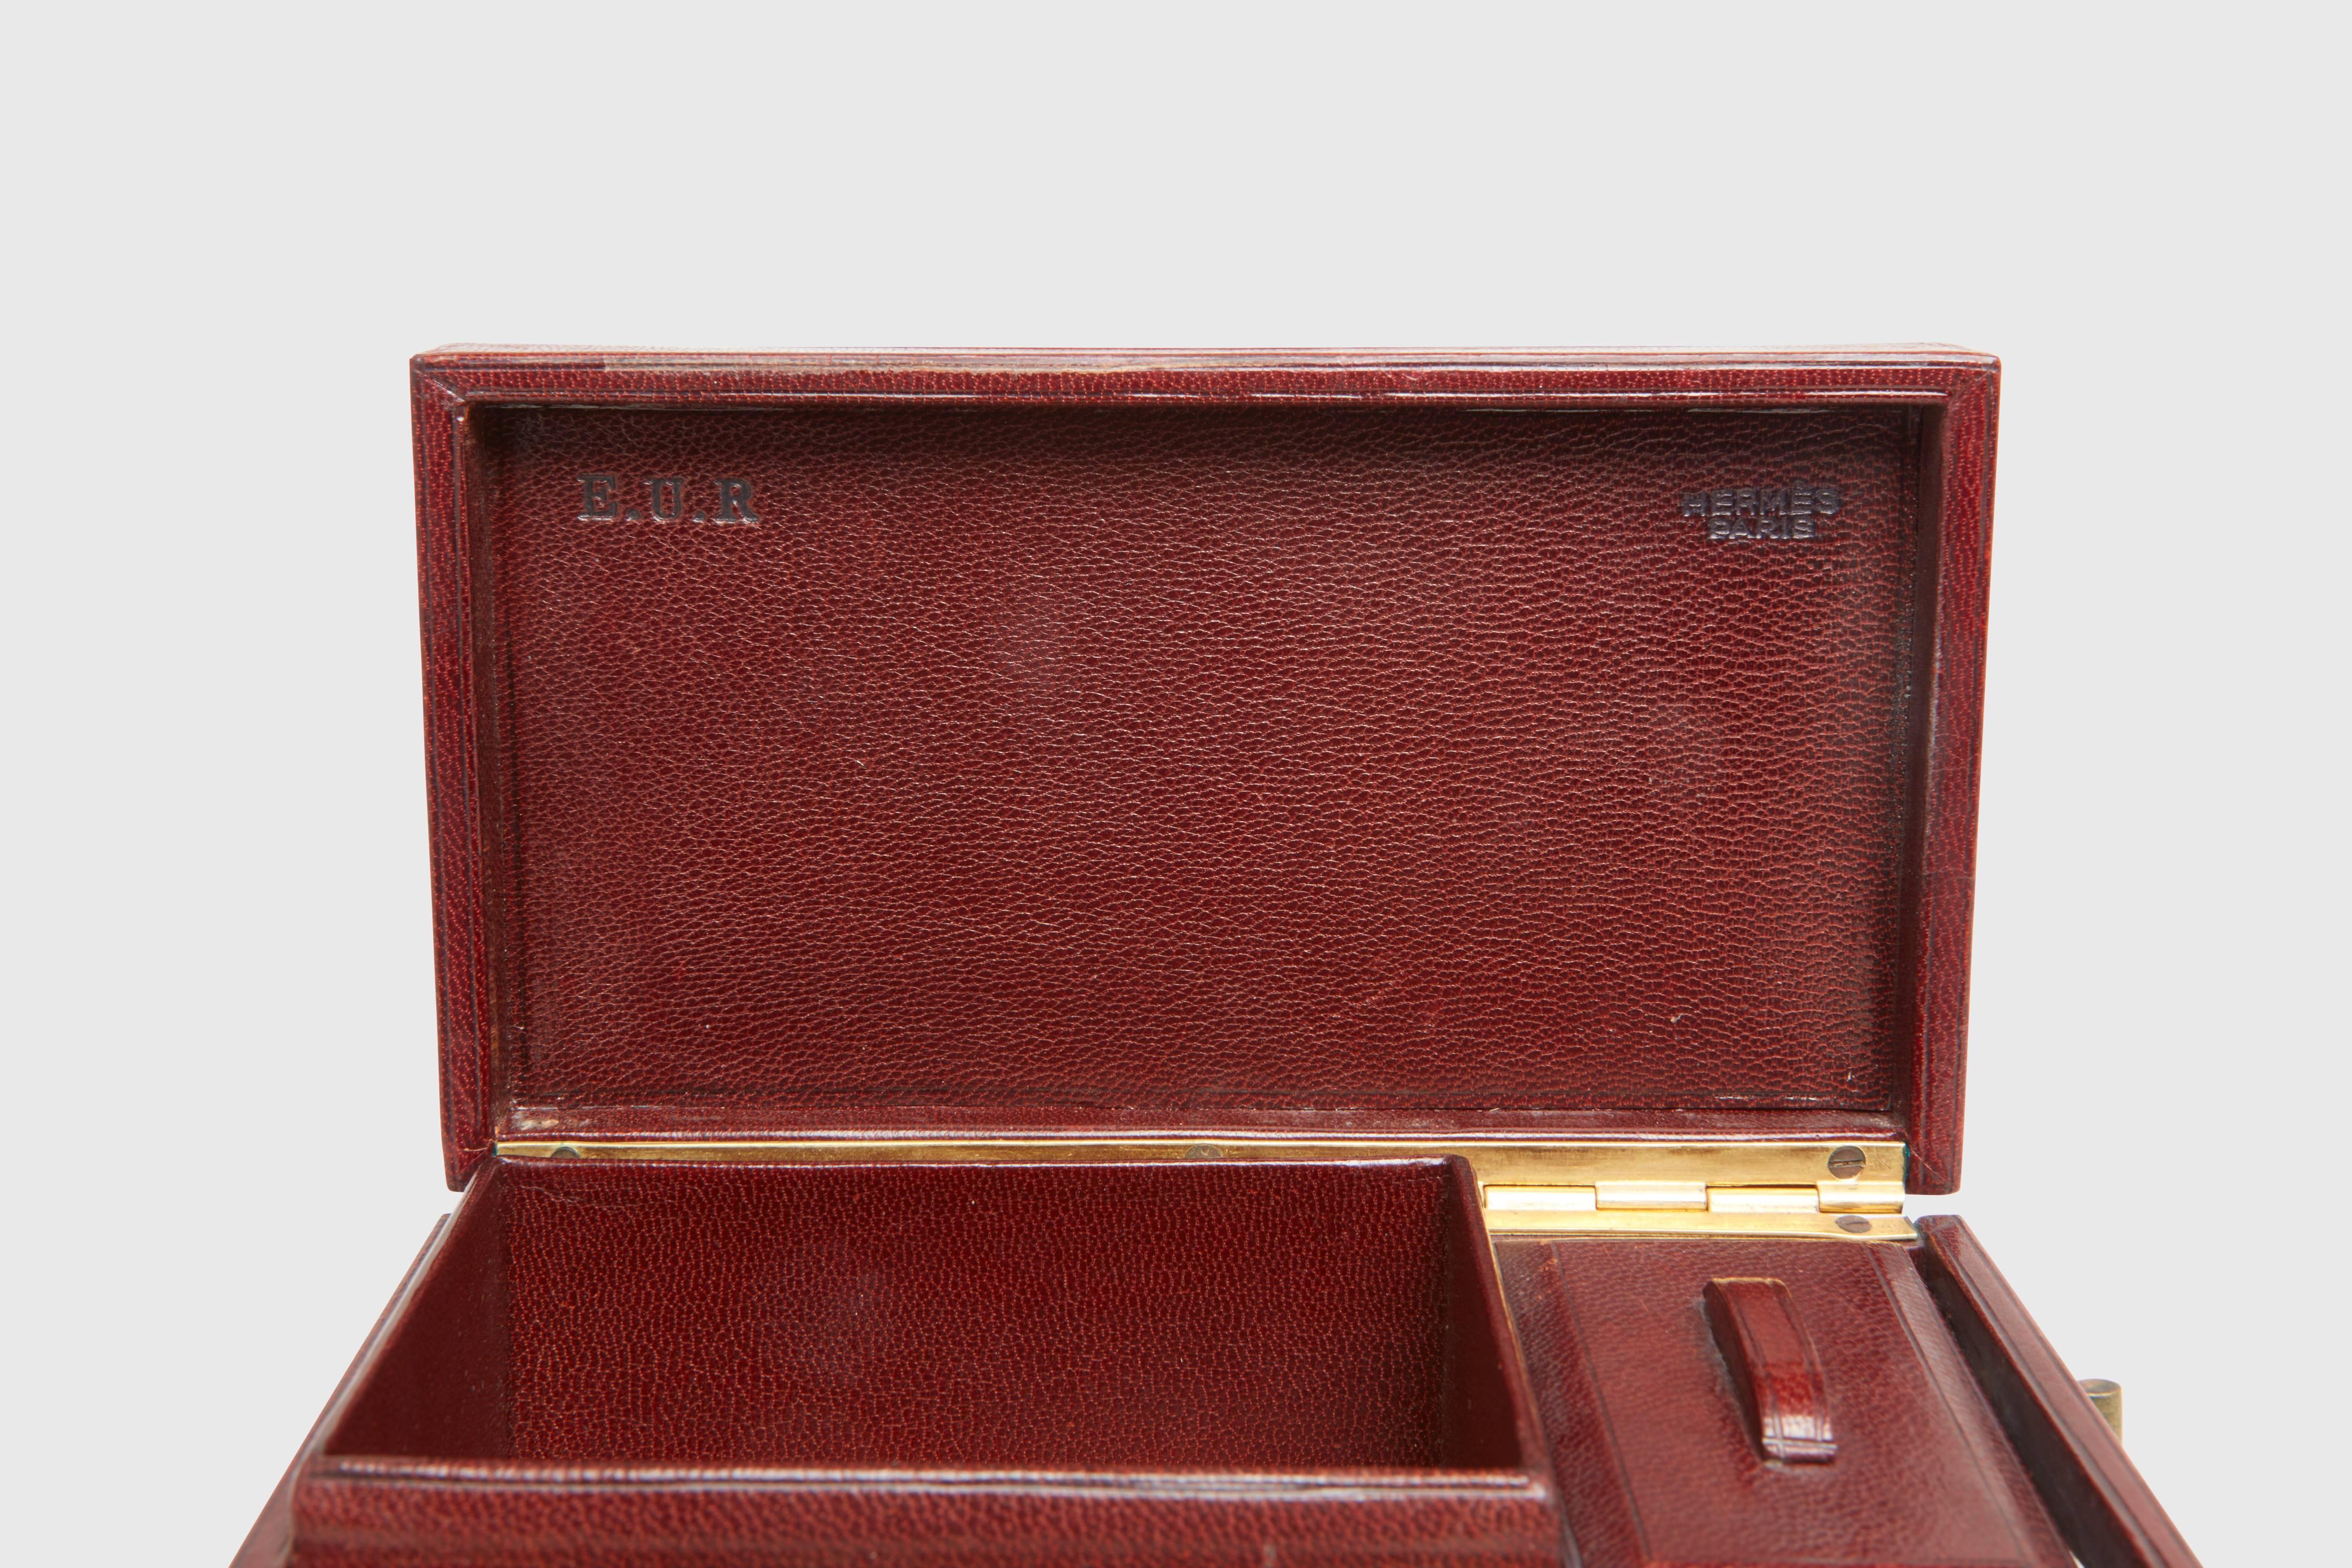 Jaeger-LeCoultre Cigar Box Clock and Hermès Matchbox In Excellent Condition For Sale In New York, NY